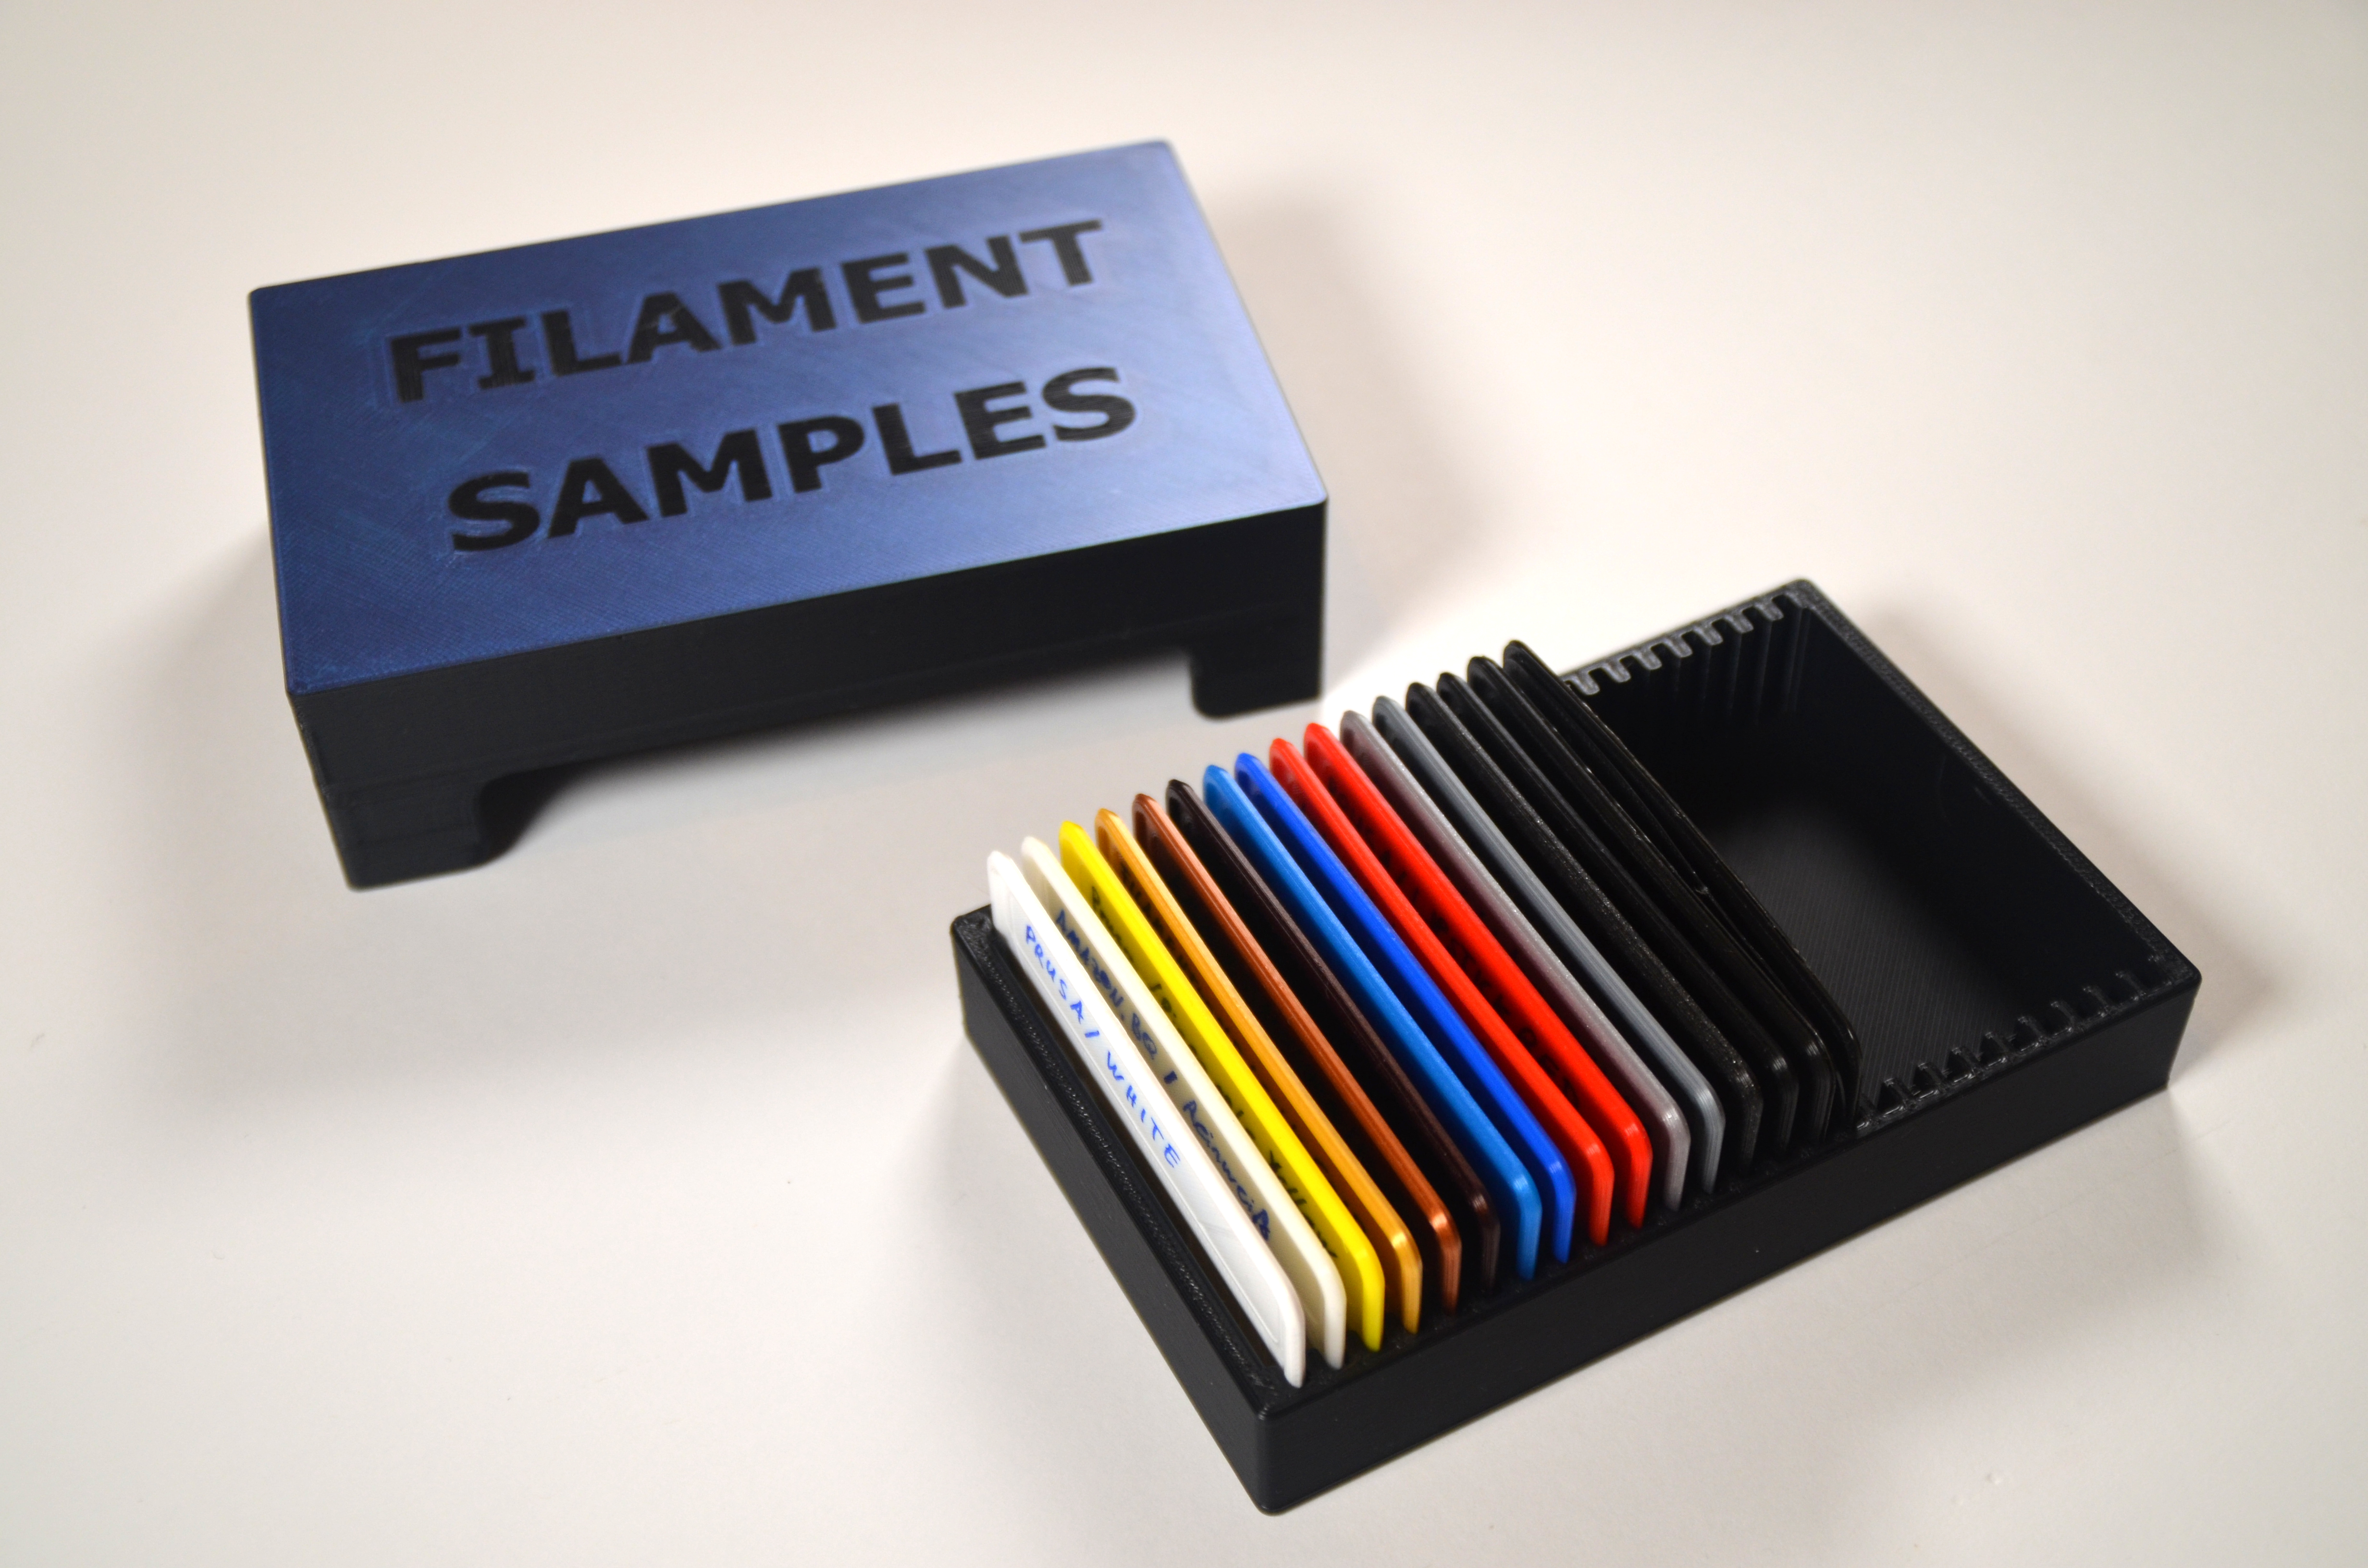 Filament Samples - Box with Magnets